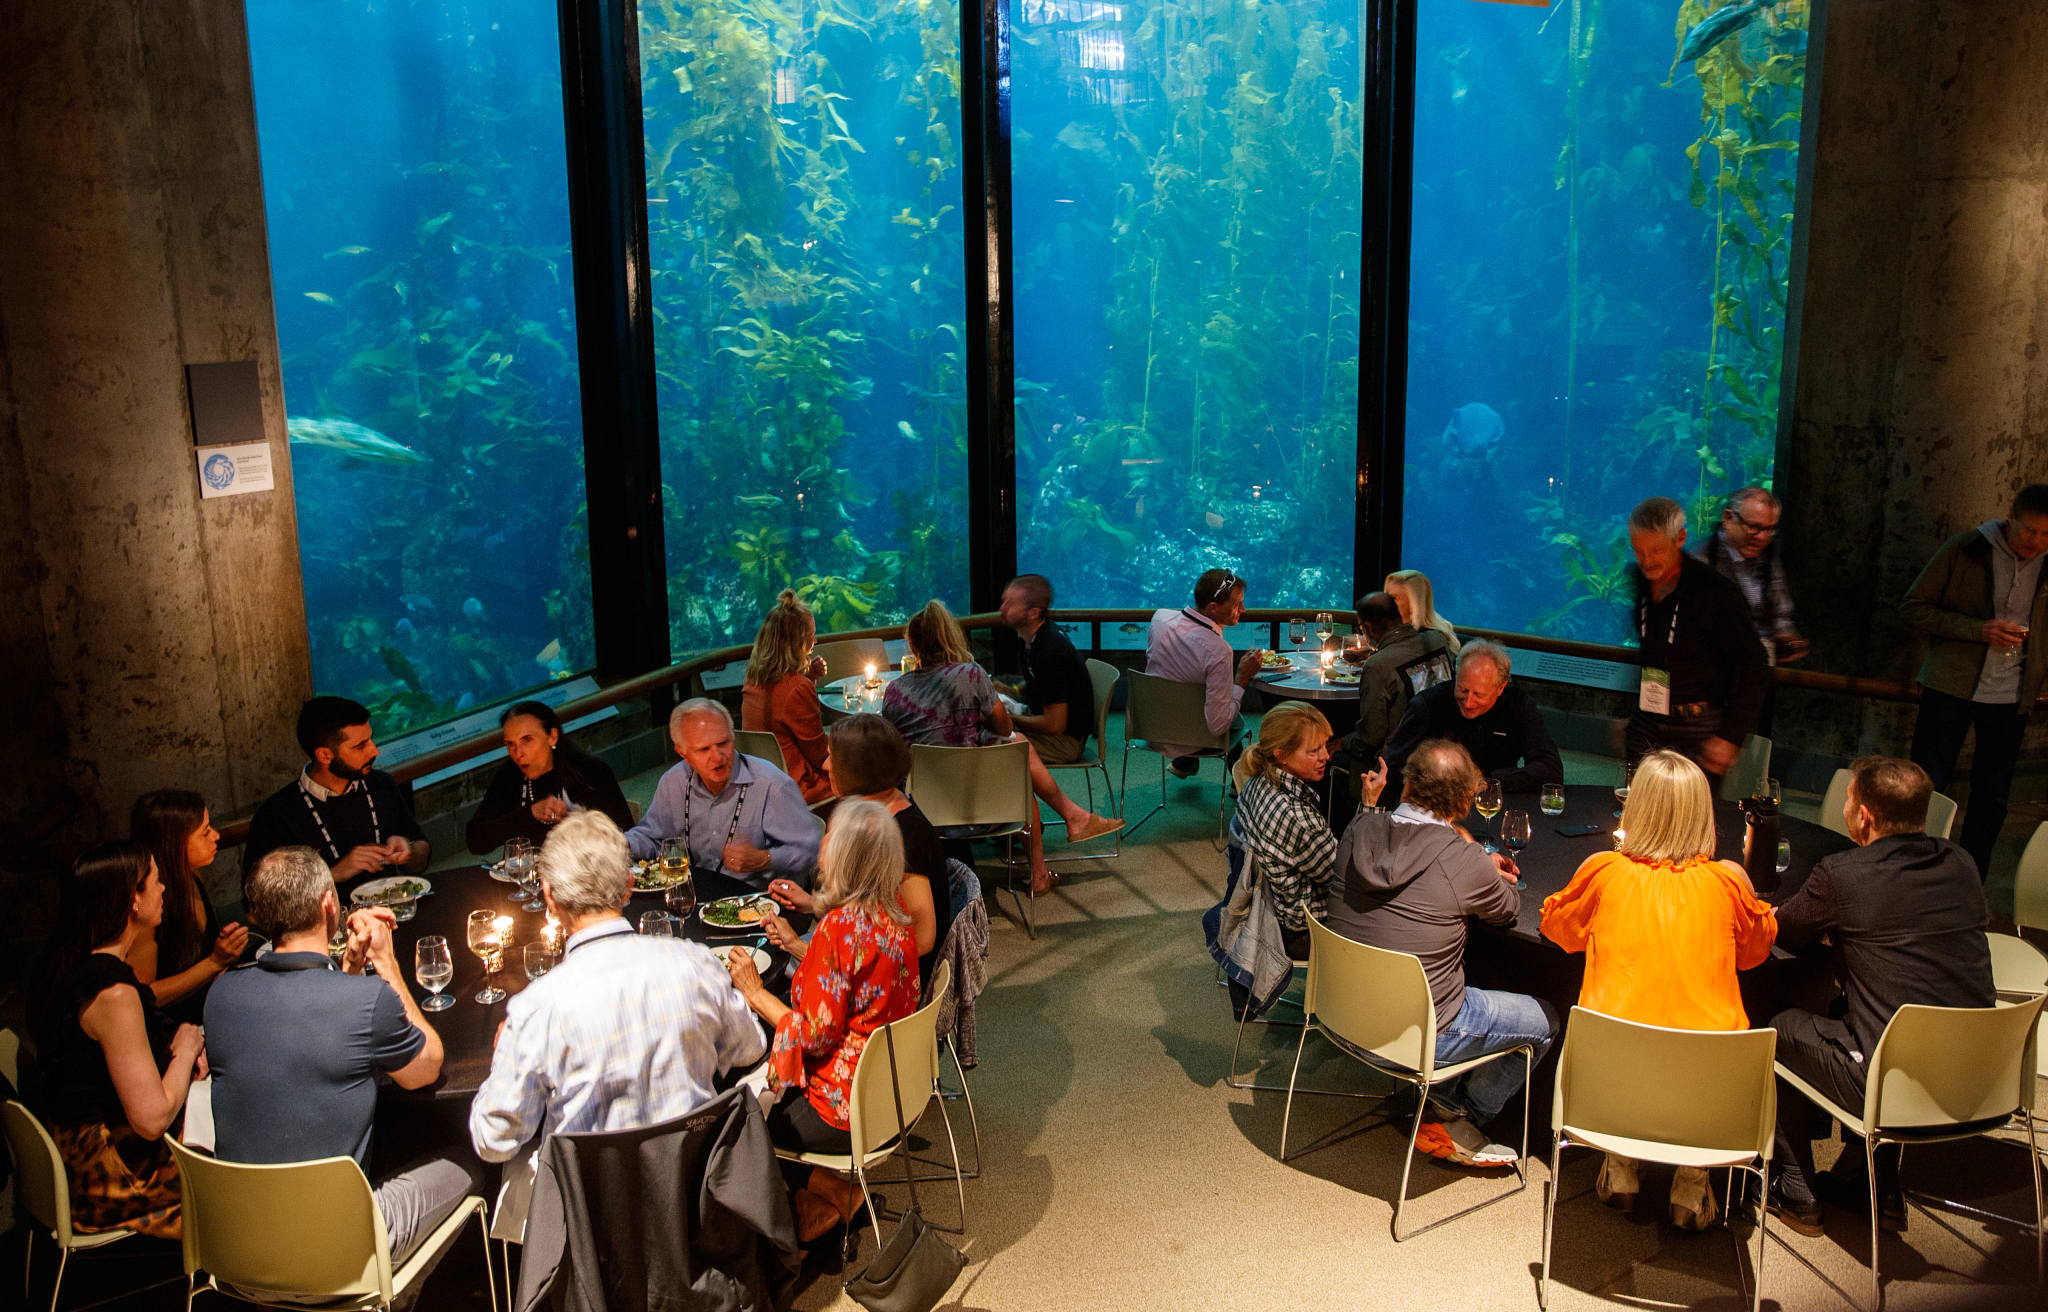 Dinning table in front of large aquarium.